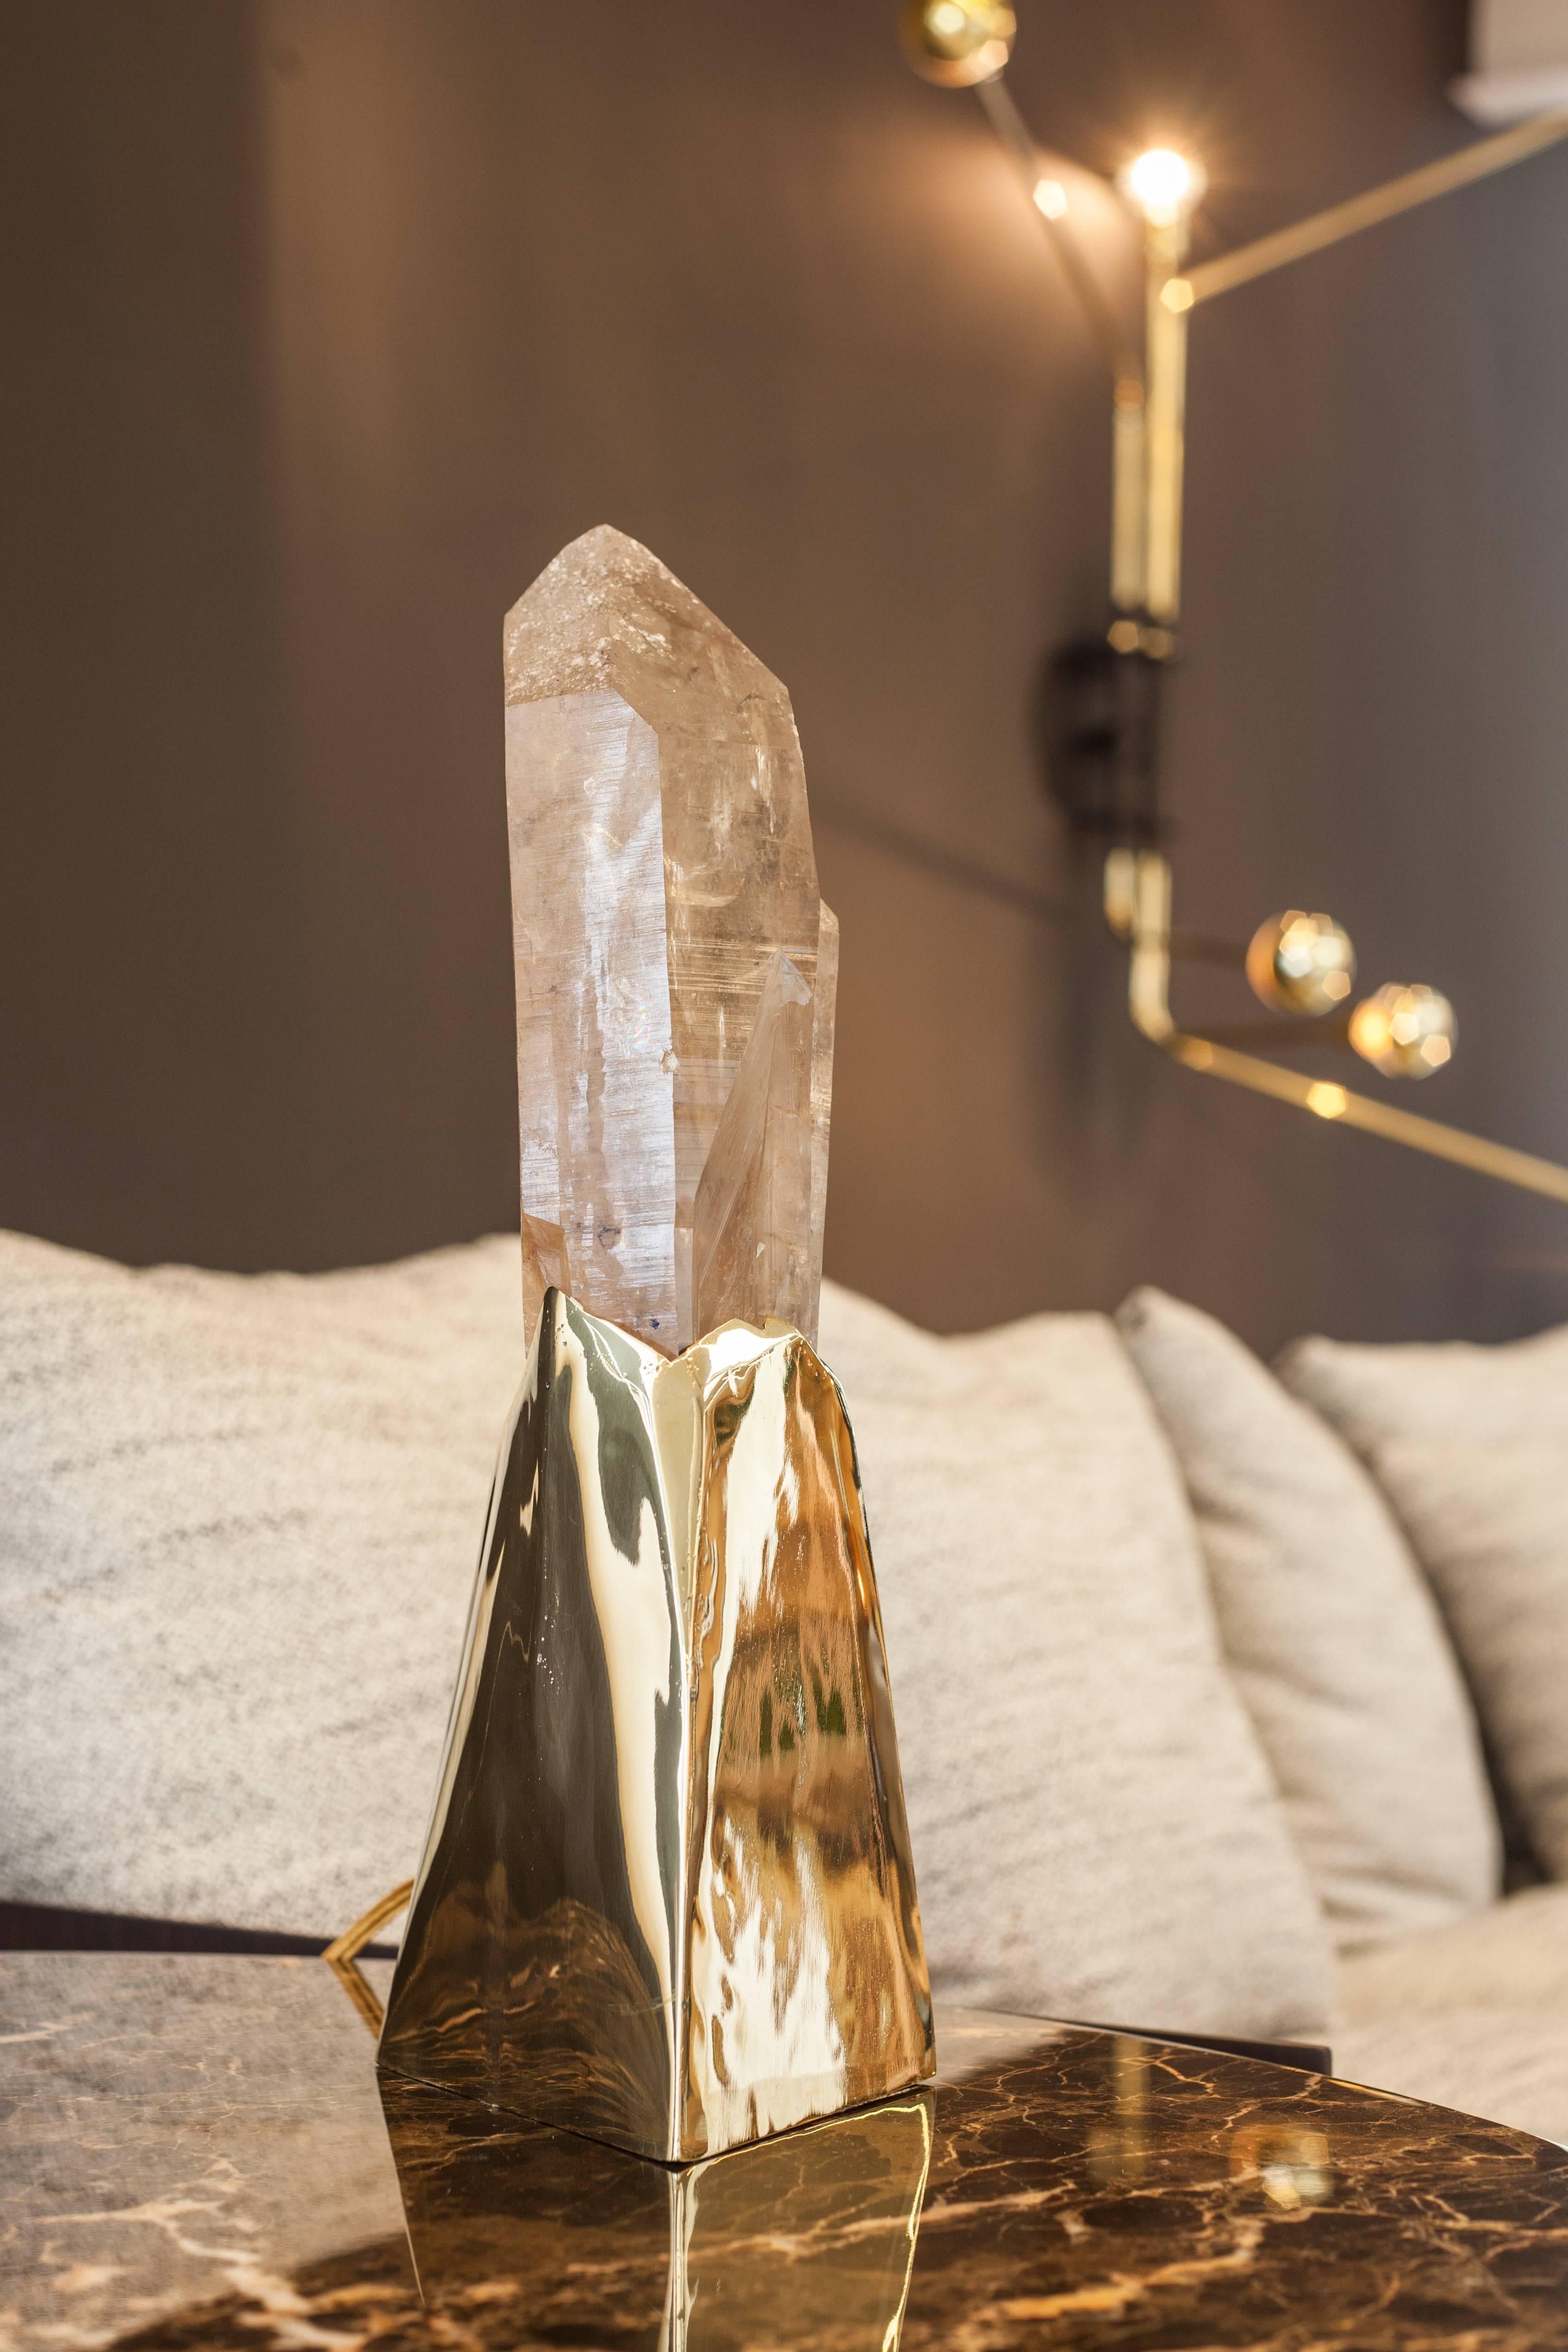 “Bi”
Unique natural dark amber Quartz point with some rutilio inclusion on the top of the point. A small point crystal popped out growing by the right. Giving the thought of a freeze grooving moment.
Base in steel with bronze bath. 
• 5.3 kg
•